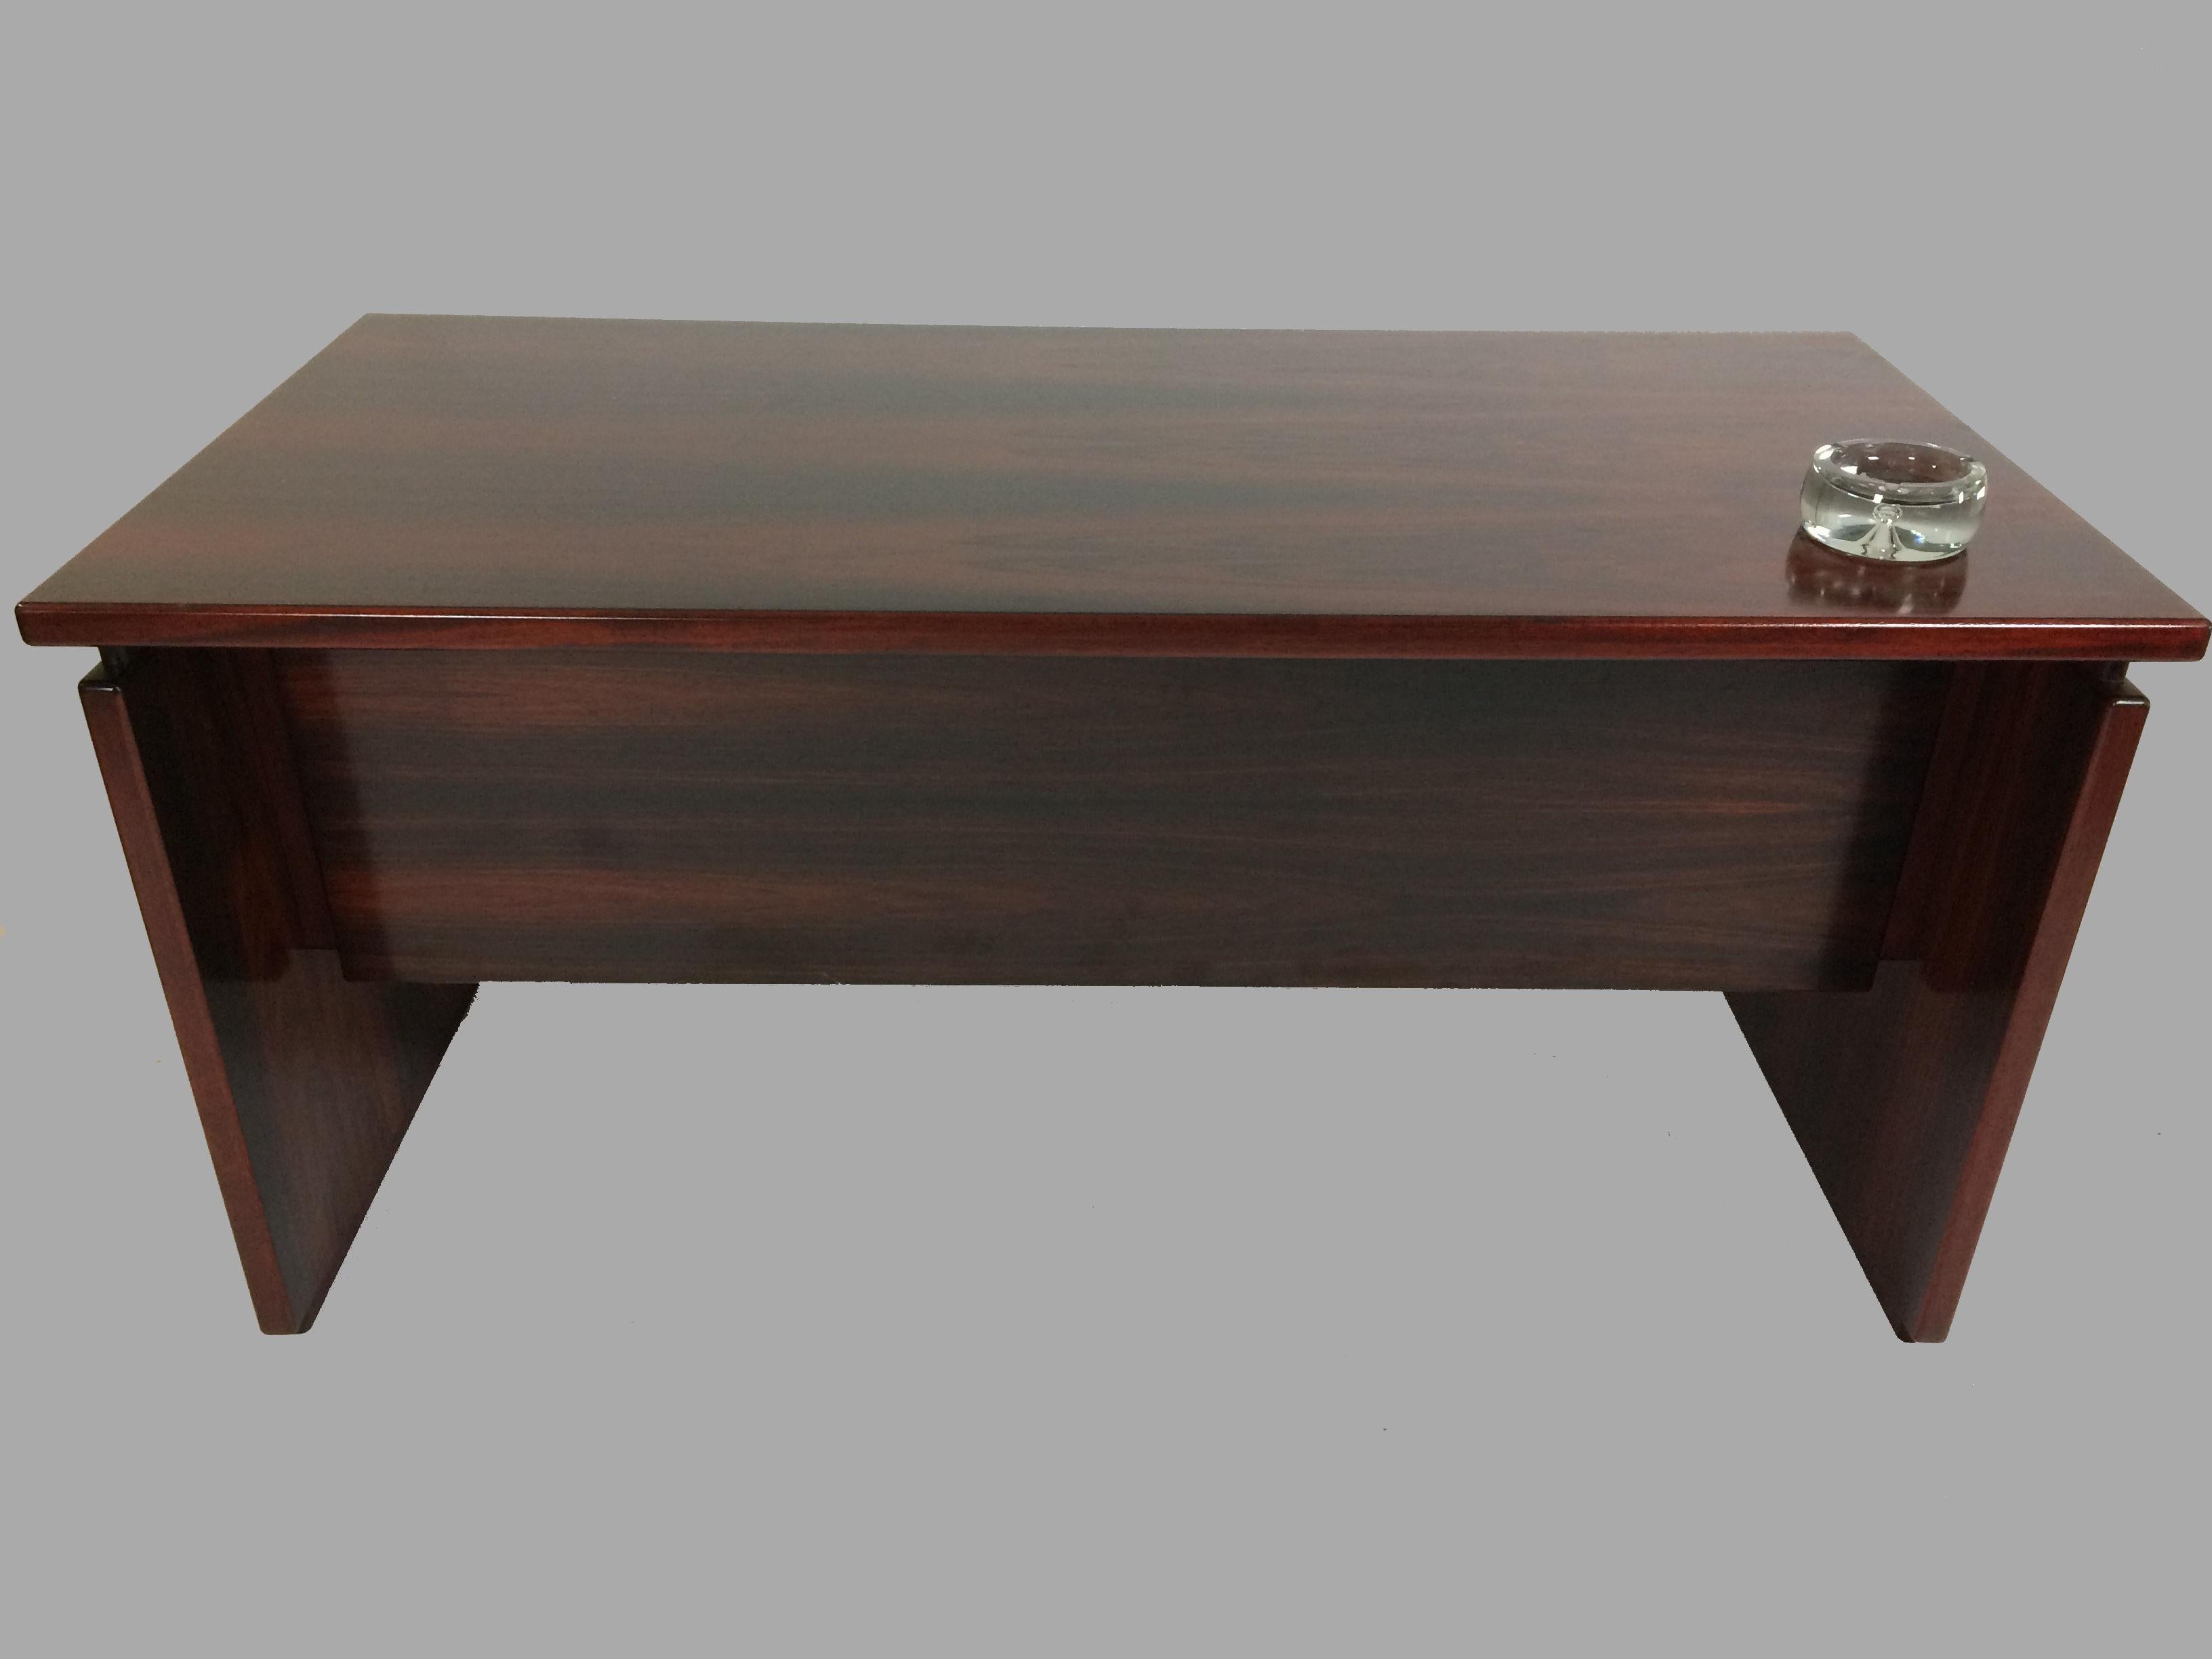 Executive desk from the 1980s designed by Bent Silberg and made by Bent Silberg Mobler.

Only very few desks of this model were produced in rosewood and this desk has been keept stored in it´s original box since it was produced . The desk is